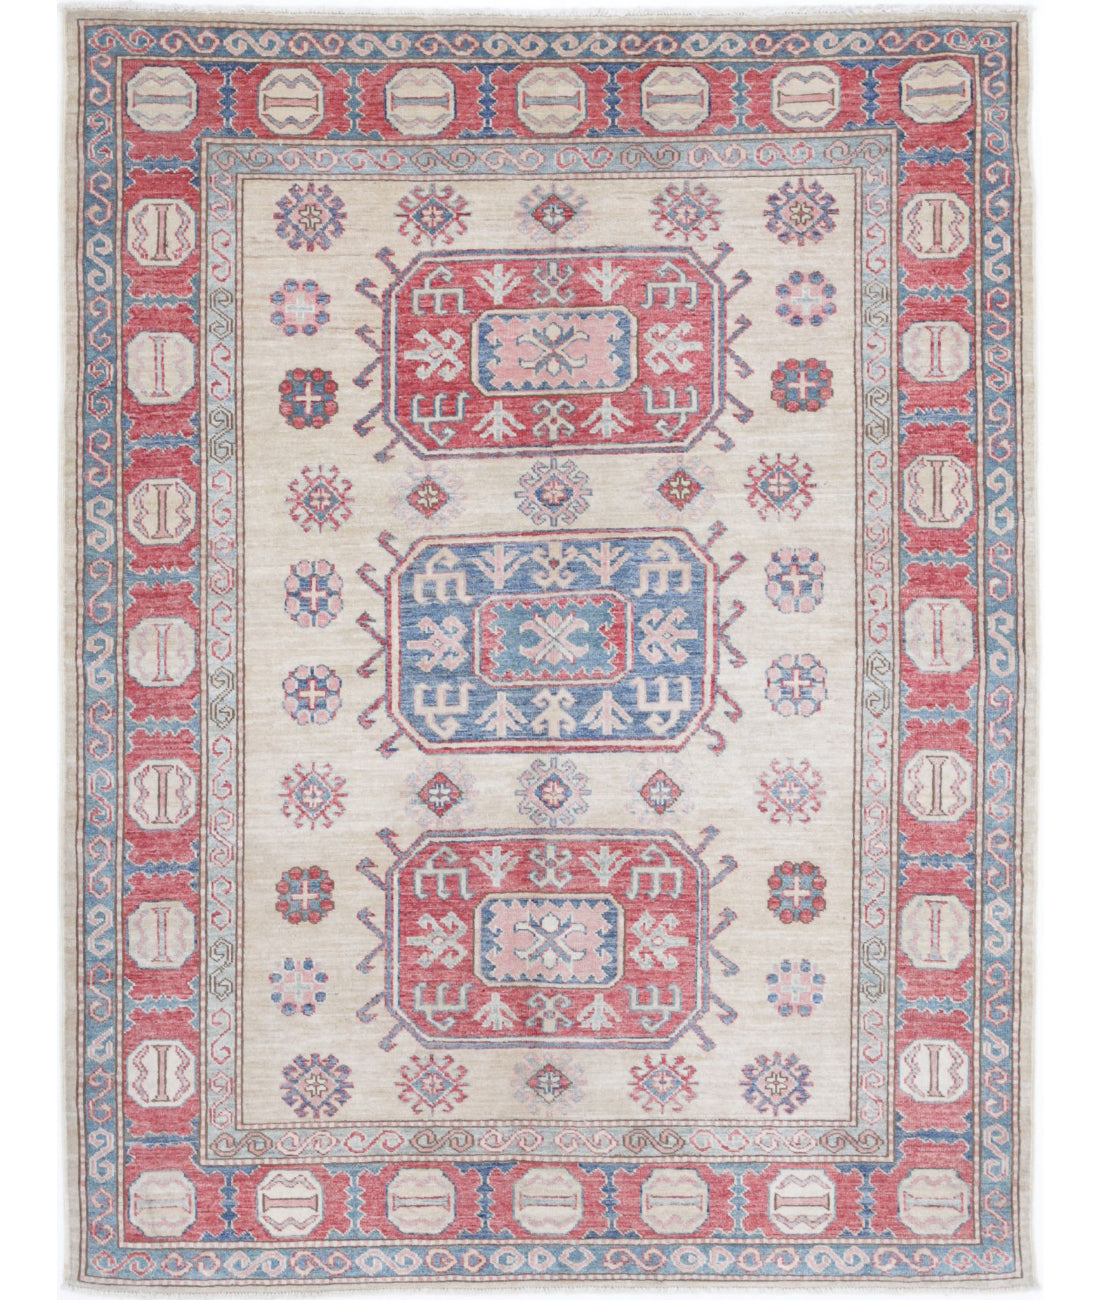 Hand Knotted Royal Kazak Wool Rug - 4&#39;8&#39;&#39; x 5&#39;11&#39;&#39; 4&#39;8&#39;&#39; x 5&#39;11&#39;&#39; (140 X 178) / Ivory / Red